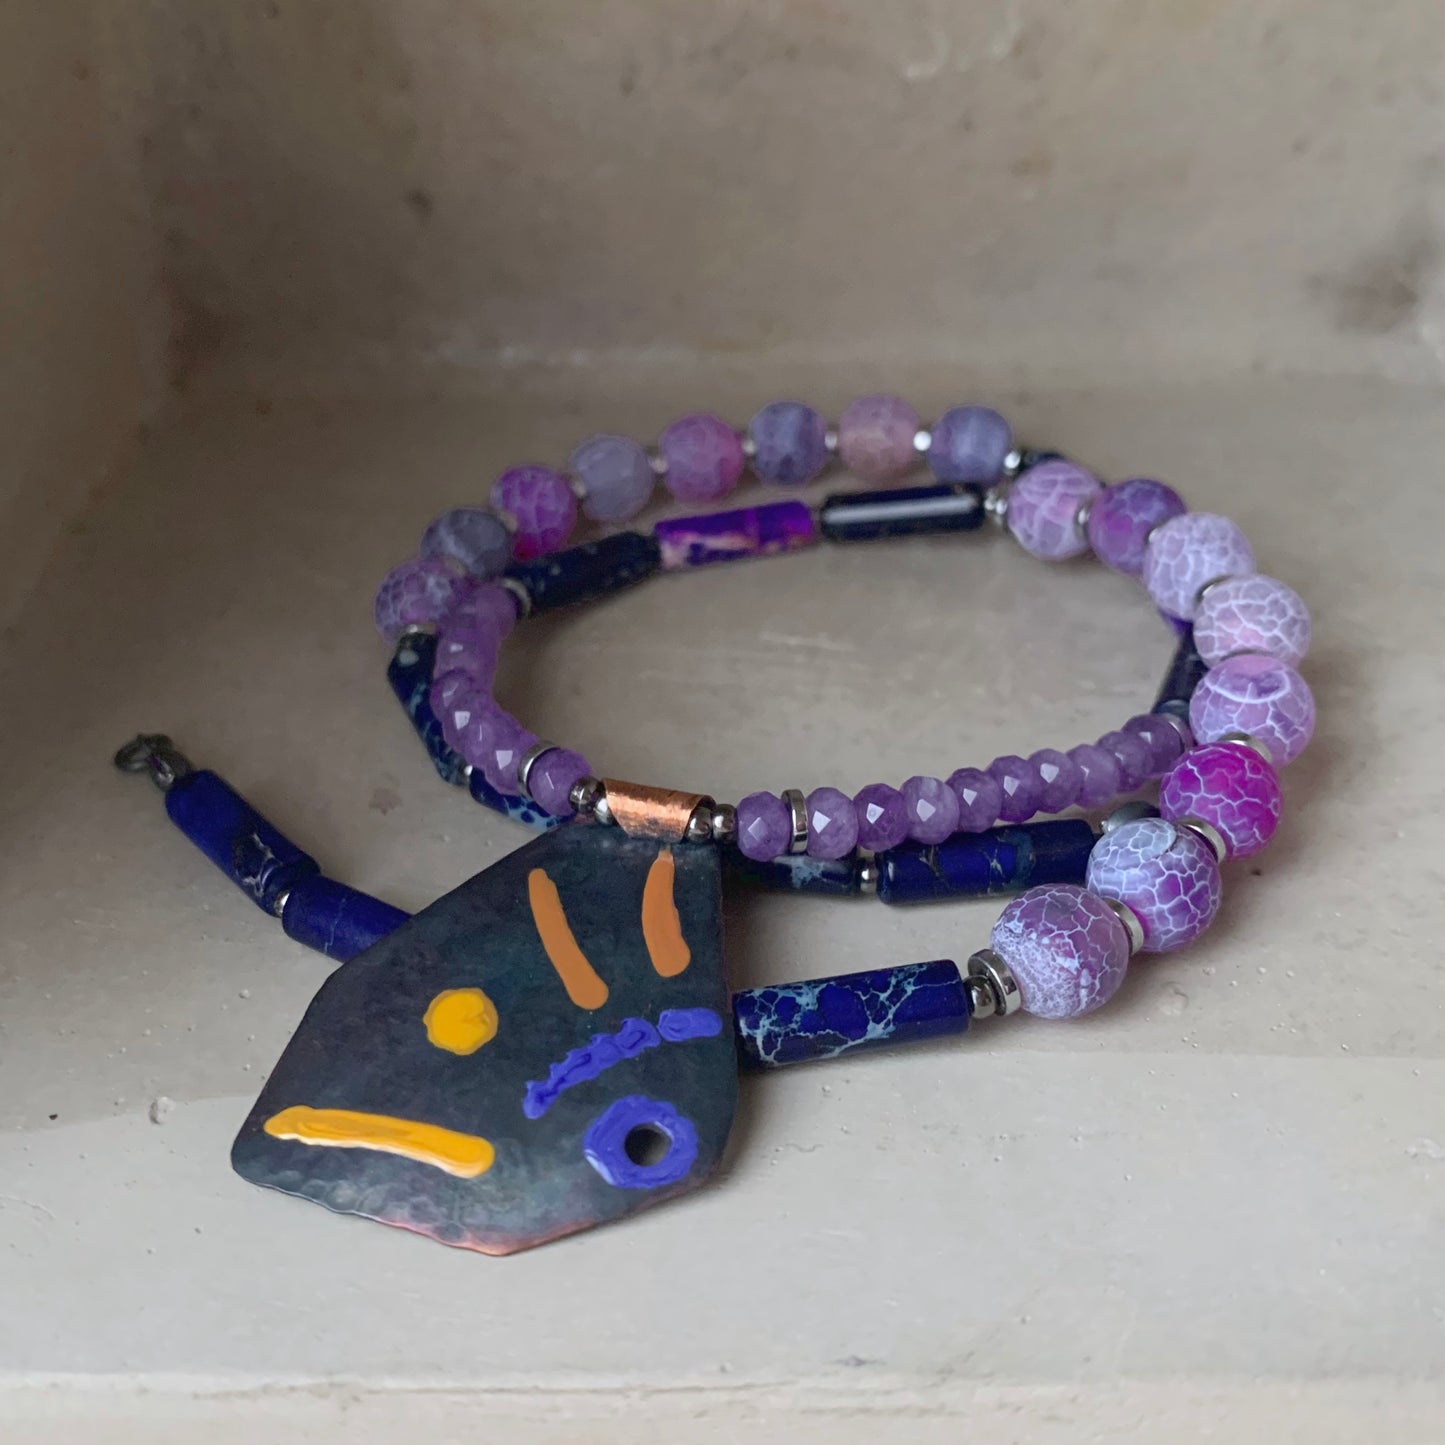 Necklace with gemstones and copper pendant 'Life on the Reef - Purple, Garnet and Ochre'